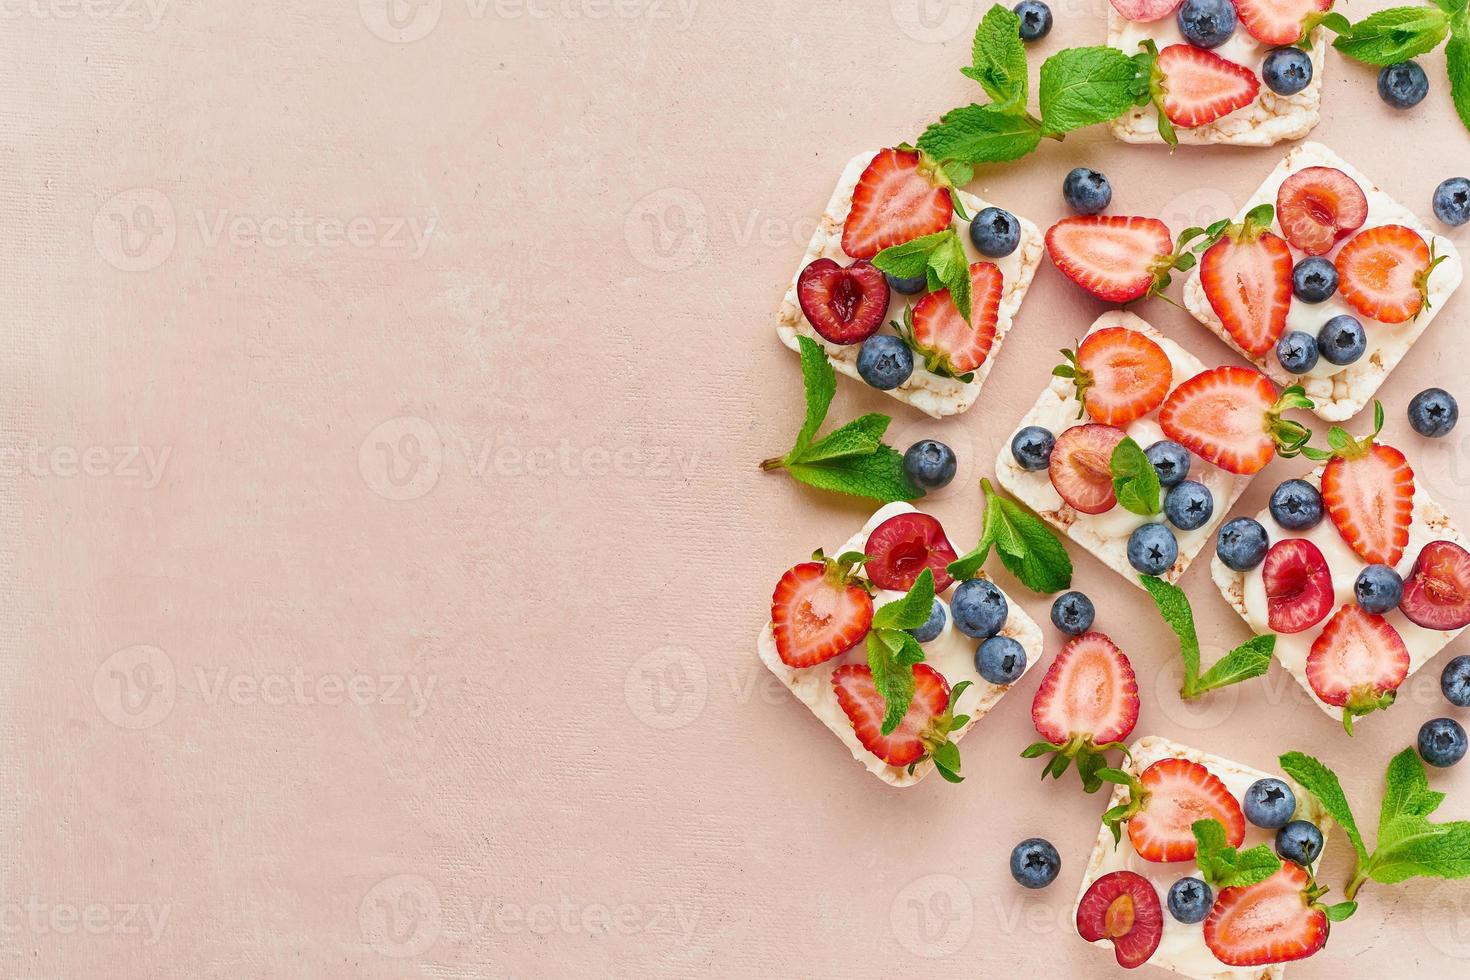 Rise crispbread with berries and fruits colorful concept on terracotta background copy space top view photo